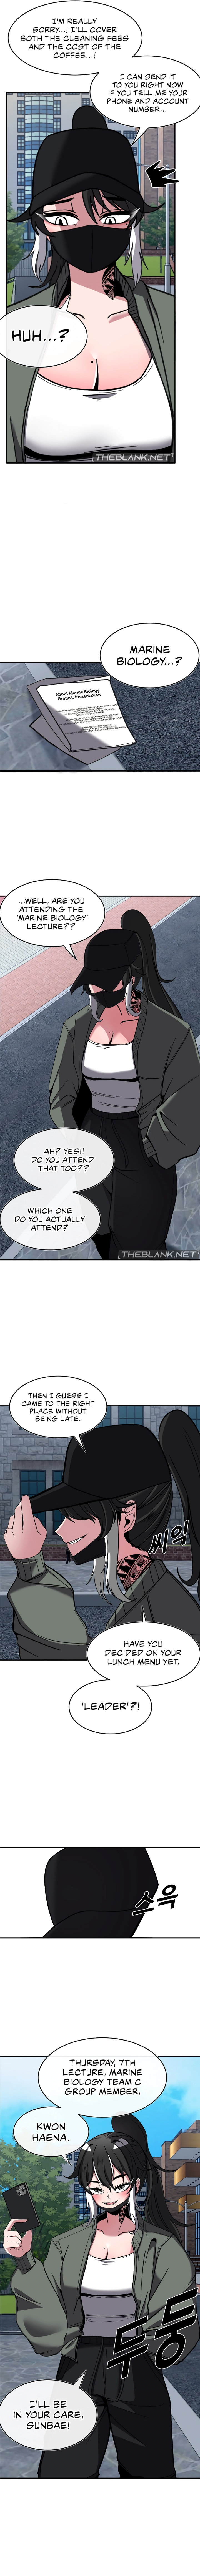 Double Life of Gukbap - Chapter 1 Page 5